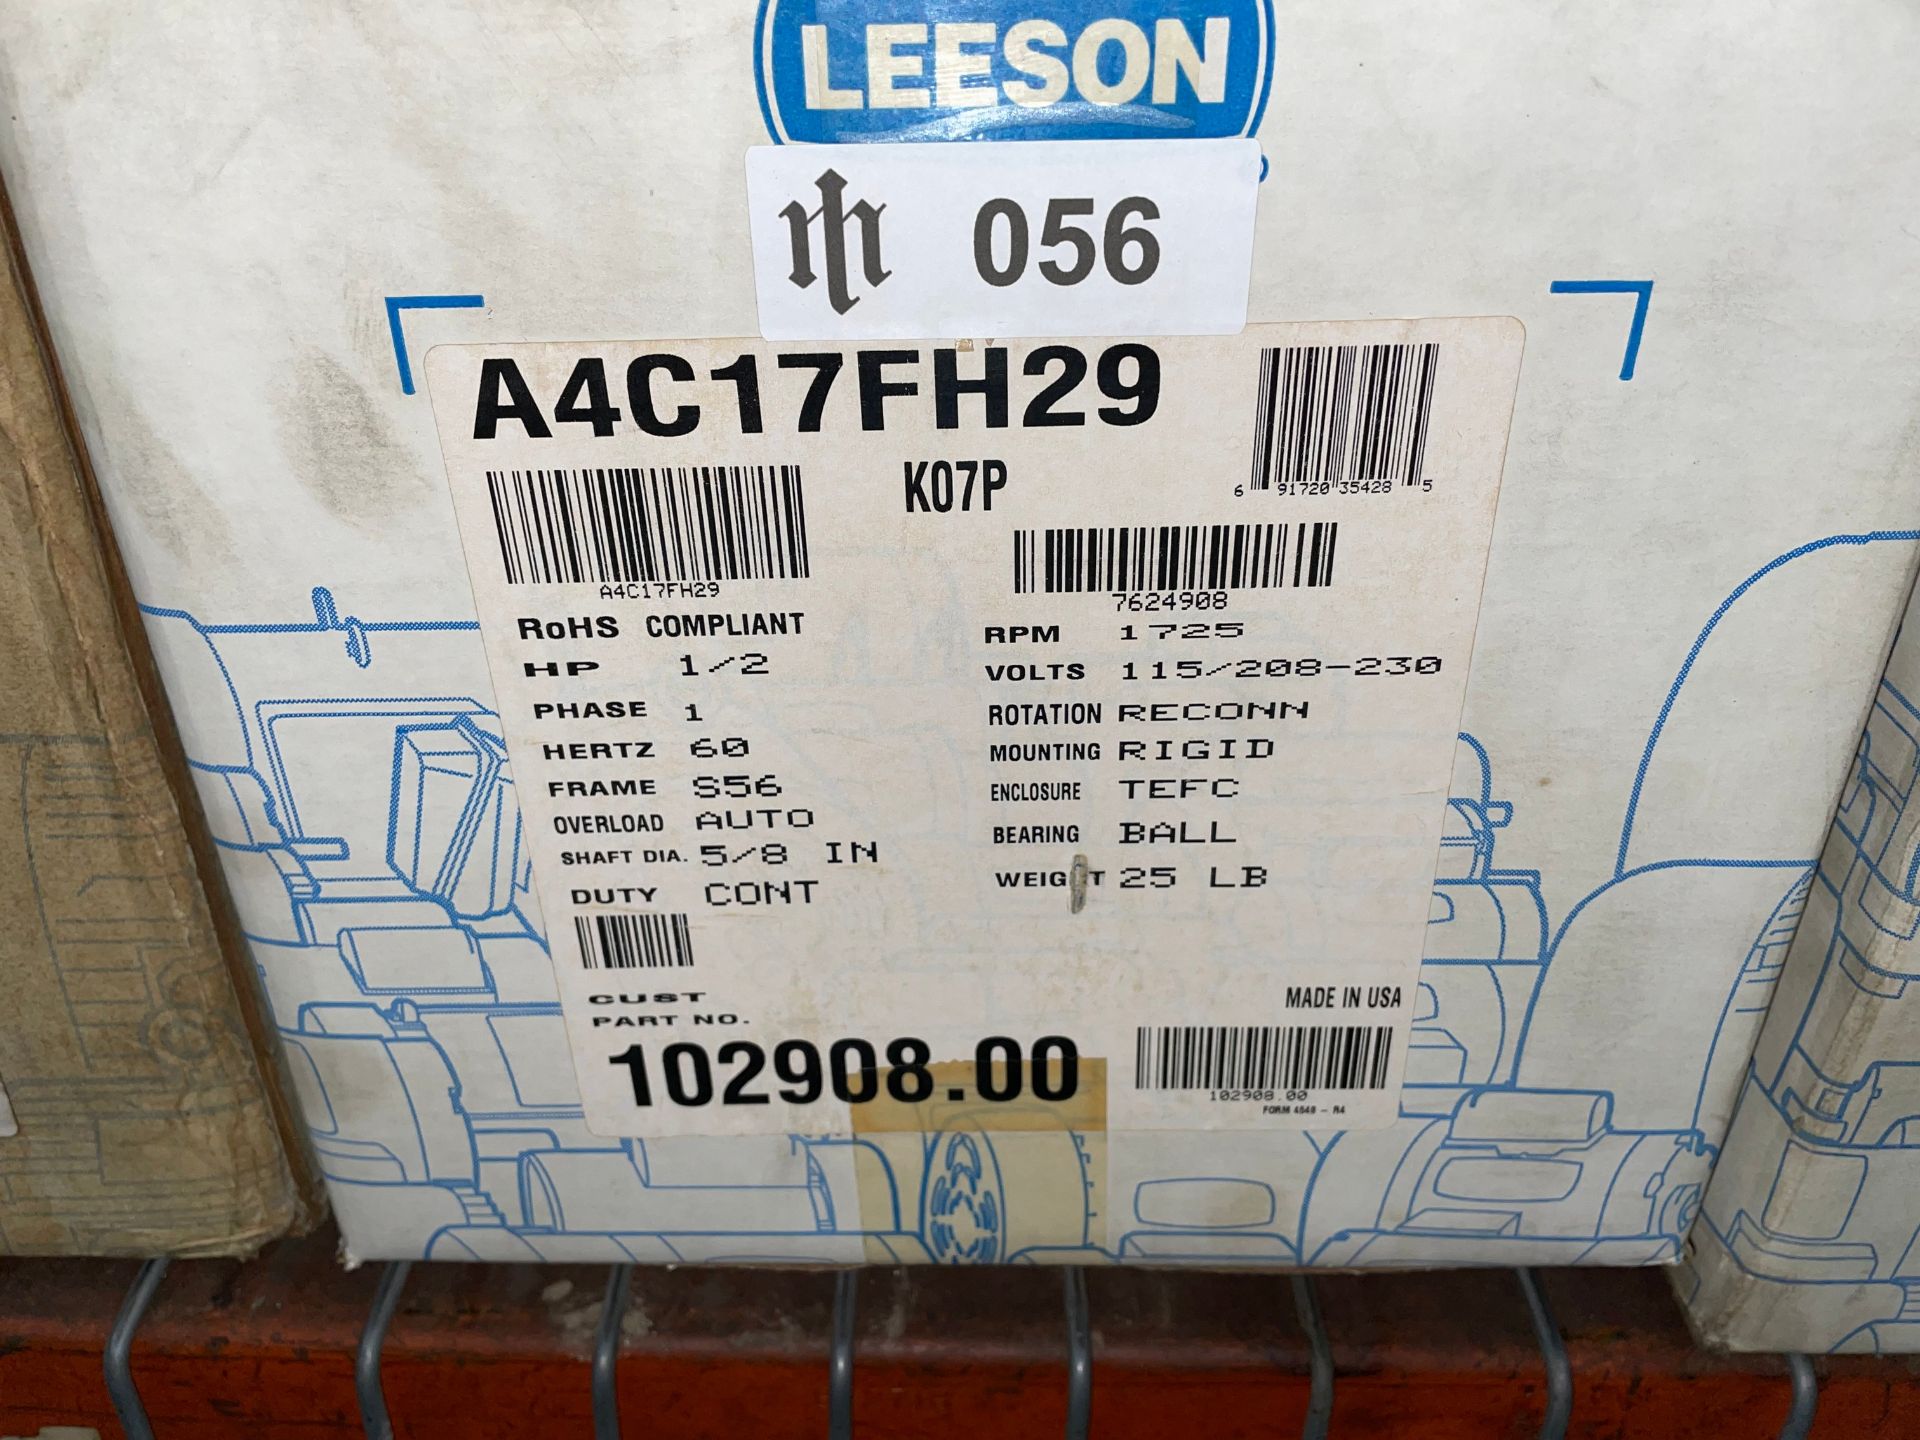 Leeson A4C17FH29 H07P Motor, 1/2HP - Image 3 of 3